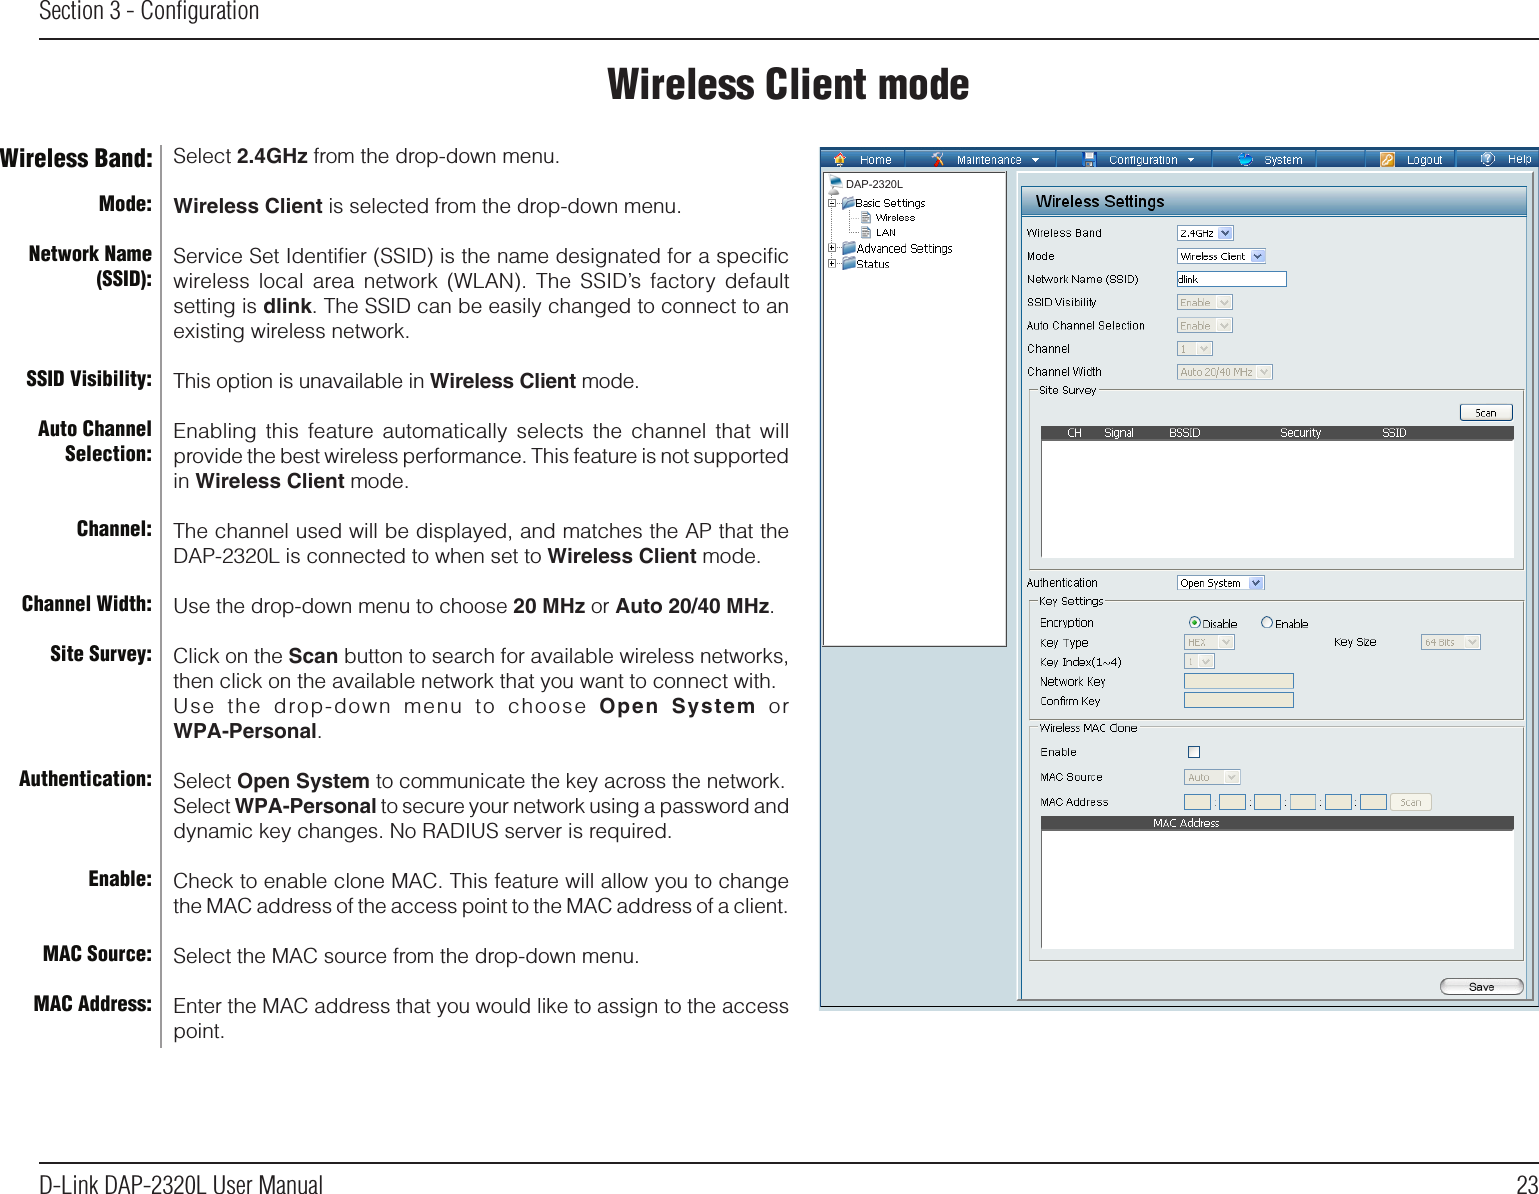 23D-Link DAP-2320L User ManualSection 3 - ConﬁgurationWireless Client modeMode:Network Name (SSID):SSID Visibility:Auto Channel Selection:Channel:Channel Width:Site Survey:Authentication:Enable:MAC Source:MAC Address:Wireless Band: Select 2.4GHz from the drop-down menu. Wireless Client is selected from the drop-down menu.Service Set Identiﬁer (SSID) is the name designated for a speciﬁc wireless local area  network  (WLAN).  The  SSID’s  factory  default setting is dlink. The SSID can be easily changed to connect to an existing wireless network.This option is unavailable in Wireless Client mode.Enabling  this  feature automatically selects the channel that will provide the best wireless performance. This feature is not supported in Wireless Client mode.The channel used will be displayed, and matches the AP that the DAP-2320L is connected to when set to Wireless Client mode.Use the drop-down menu to choose 20 MHz or Auto 20/40 MHz.Click on the Scan button to search for available wireless networks, then click on the available network that you want to connect with.Use  the  drop-down  menu  to  choose  Open  System  orWPA-Personal.Select Open System to communicate the key across the network.Select WPA-Personal to secure your network using a password and dynamic key changes. No RADIUS server is required.Check to enable clone MAC. This feature will allow you to change the MAC address of the access point to the MAC address of a client.Select the MAC source from the drop-down menu.Enter the MAC address that you would like to assign to the access point.DAP-2320L